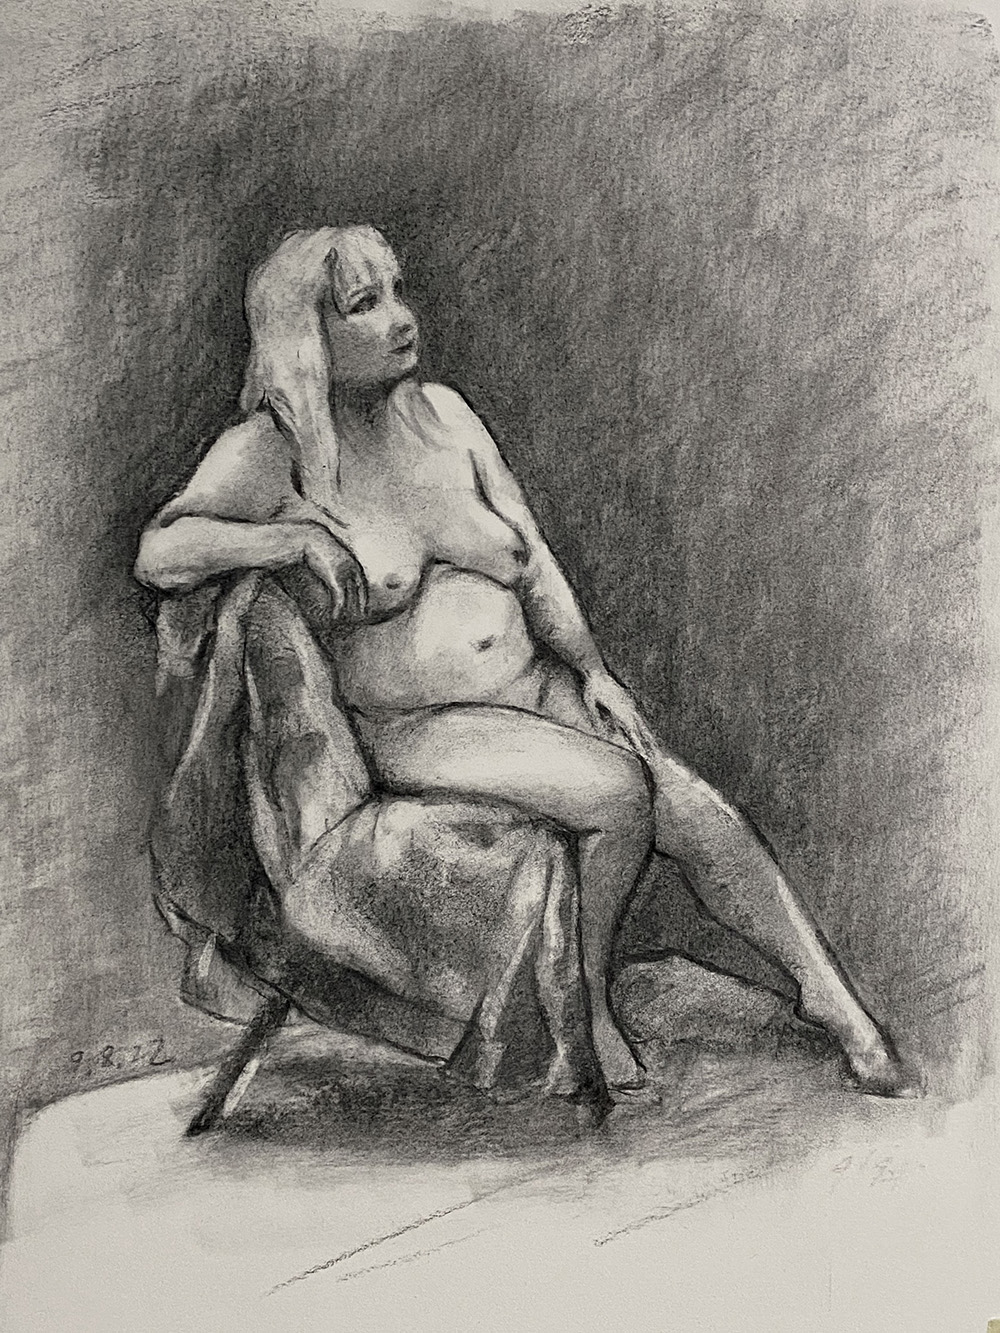 Drawing of a life figure